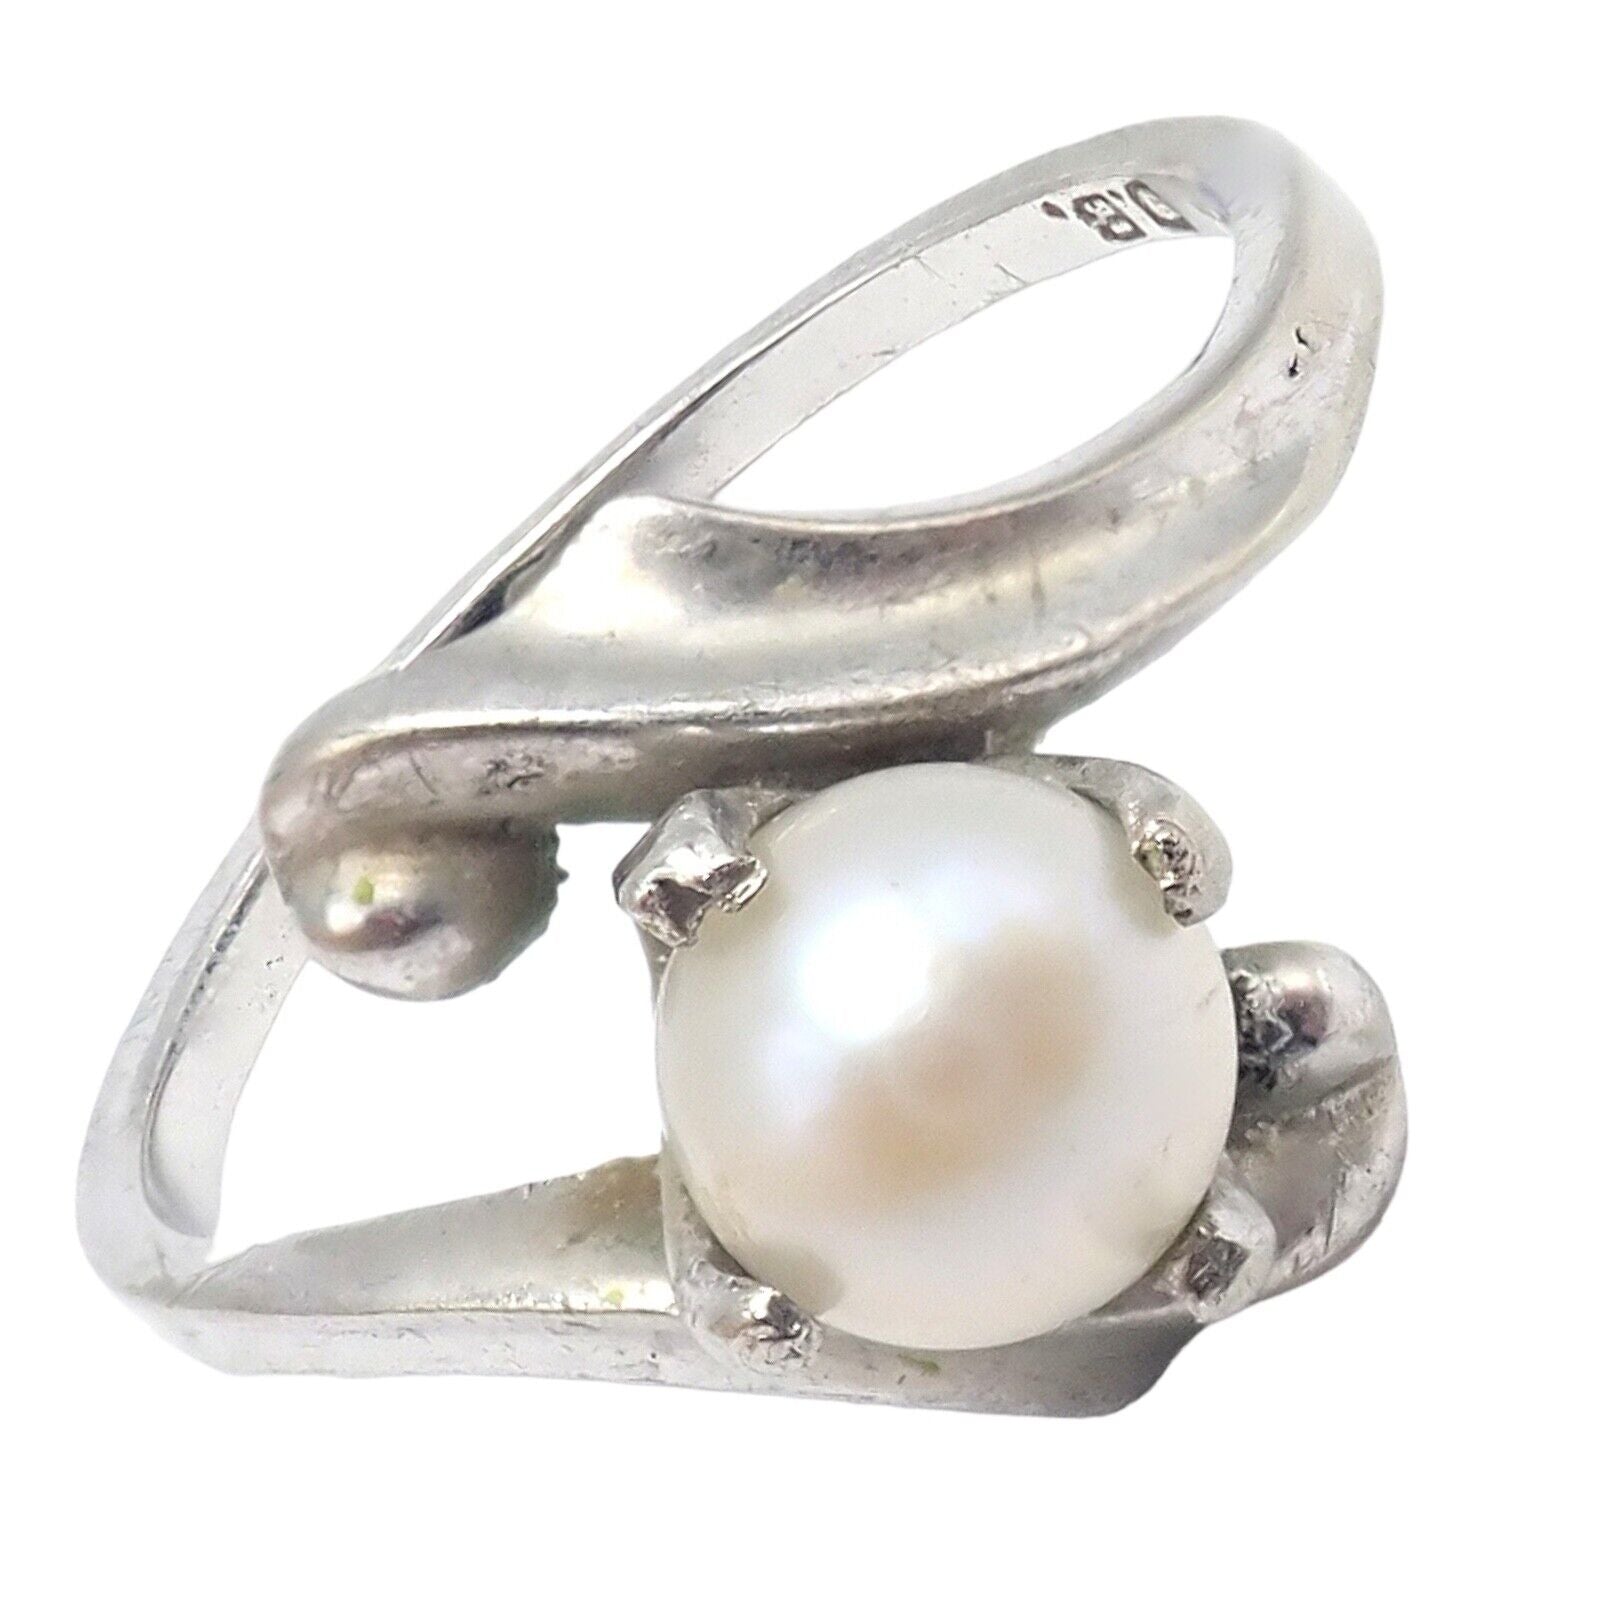 Dawkins Benny Jewelry & Watches:Vintage & Antique Jewelry:Rings Vintage Estate 10k White Gold Pearl DB Dawkins Benny Ring sz 6.5